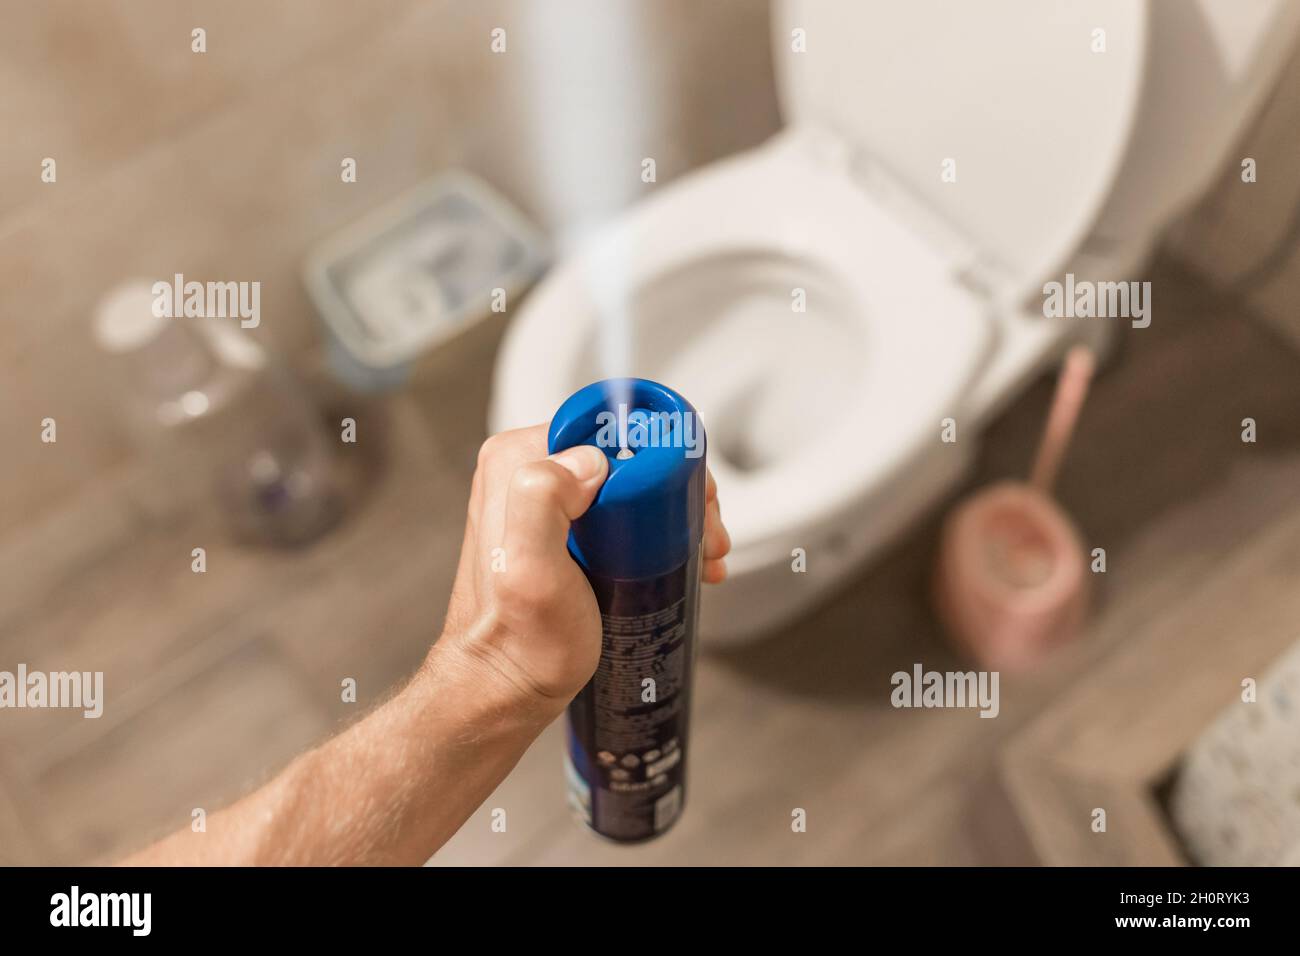 The guy's hand holds and sprays the air freshener in the toilet or bathroom. Home Hygiene Concept. Stock Photo